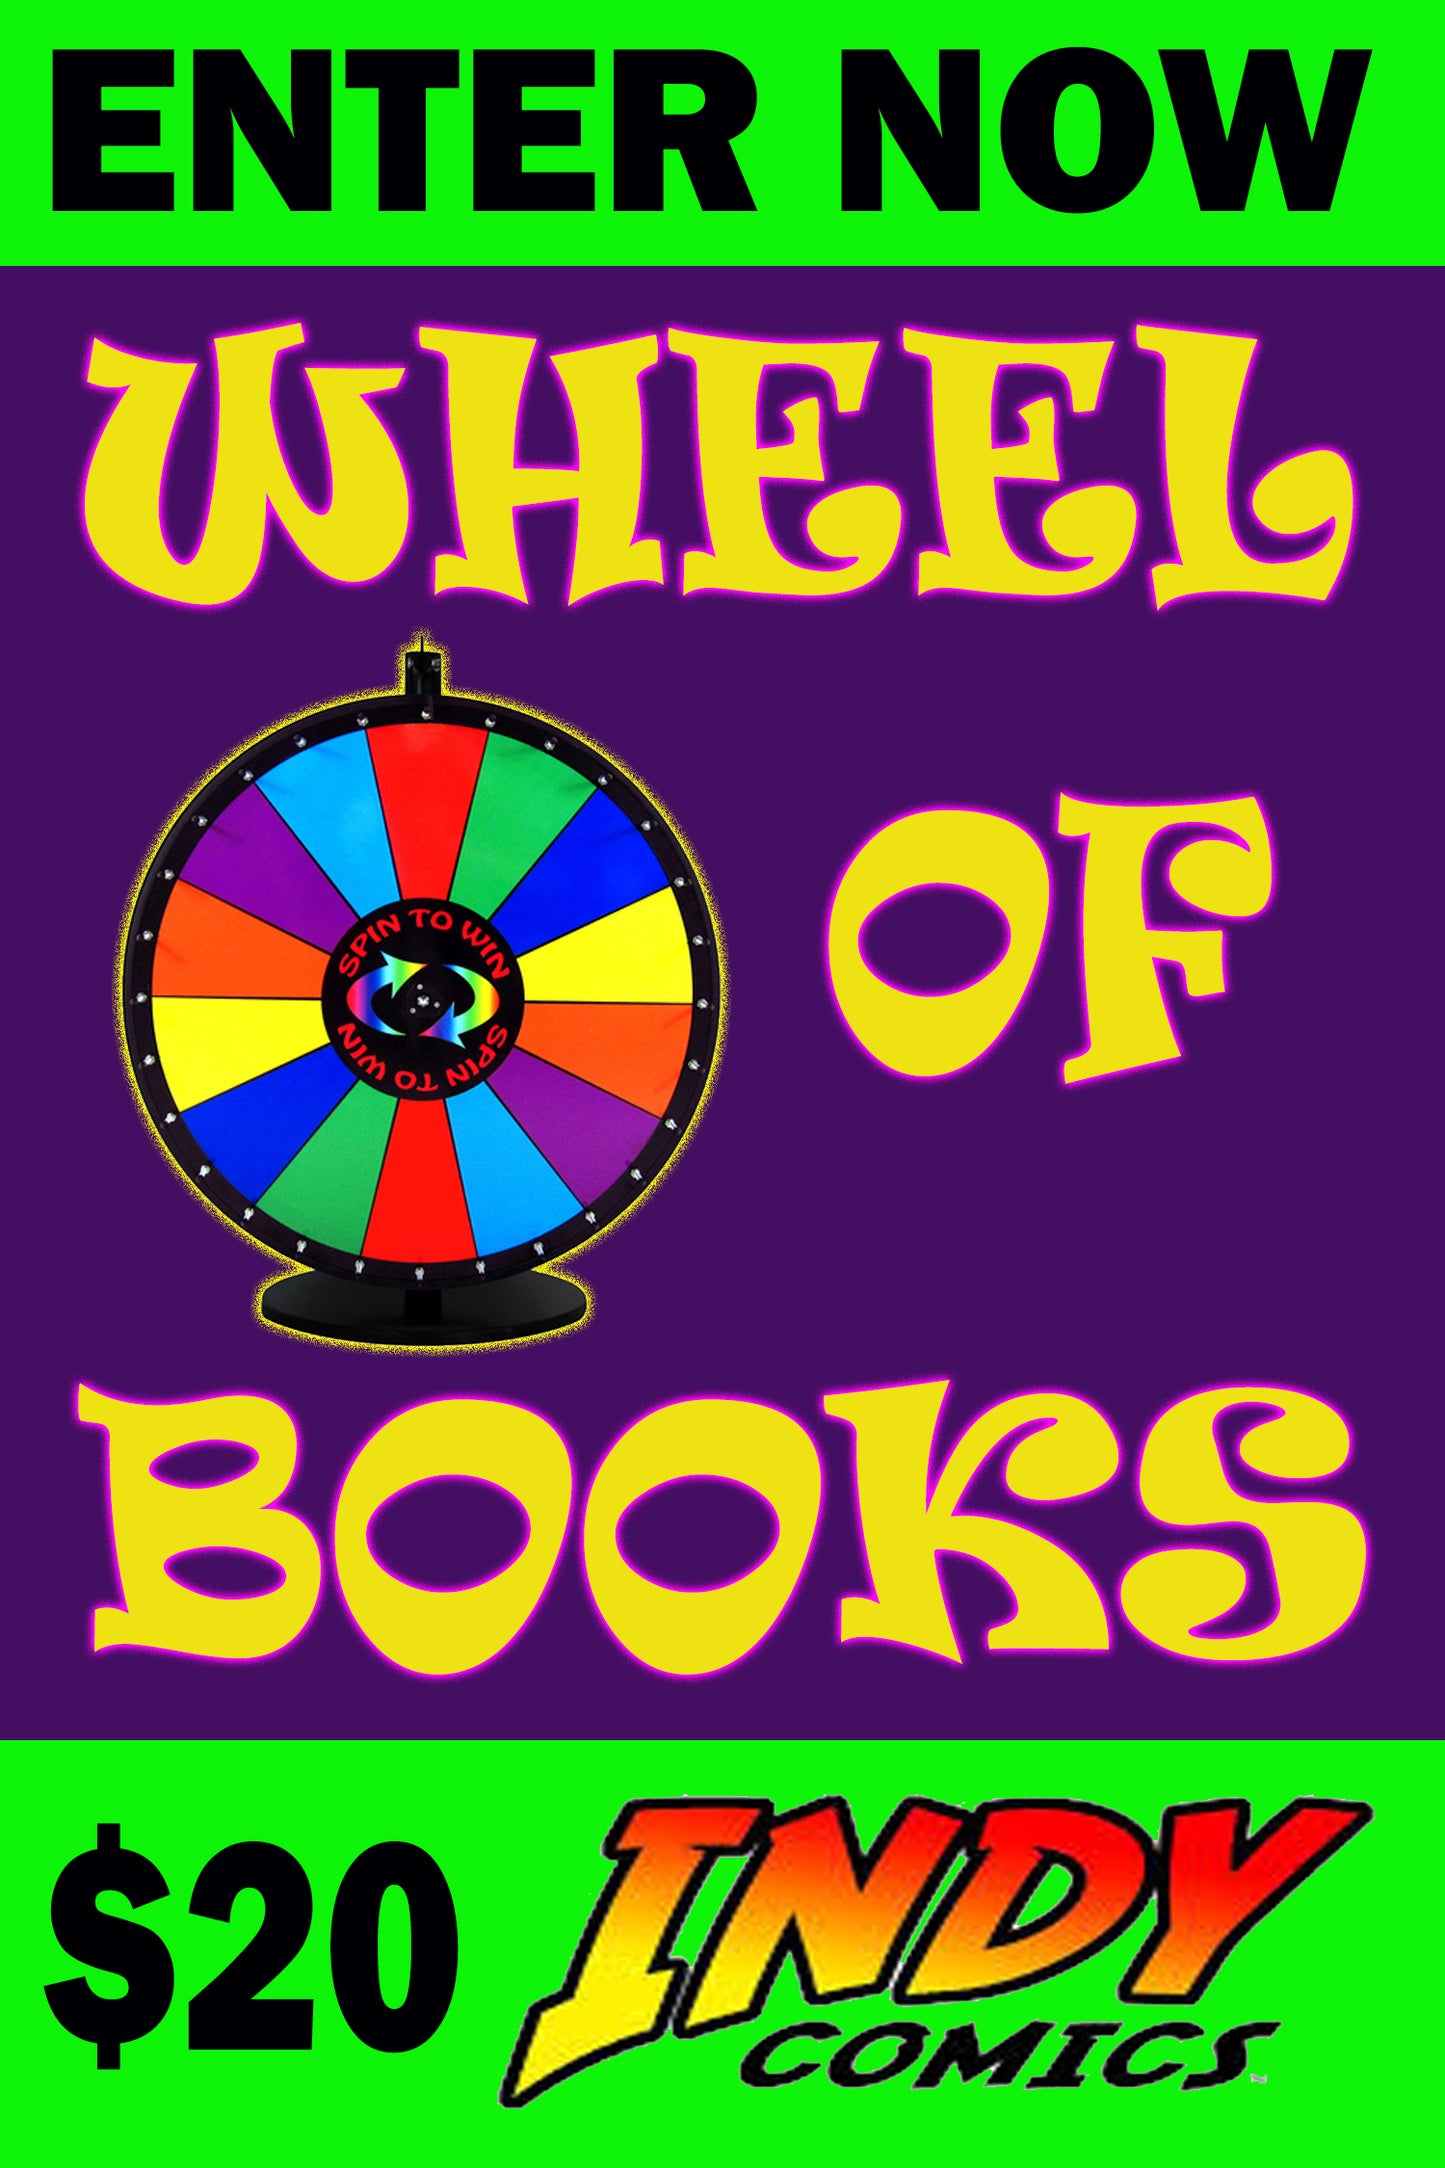 WHEEL OF BOOKS $20 INDY COMICS SESSION ENTRY ON FRIDAY JUNE 19, 2020